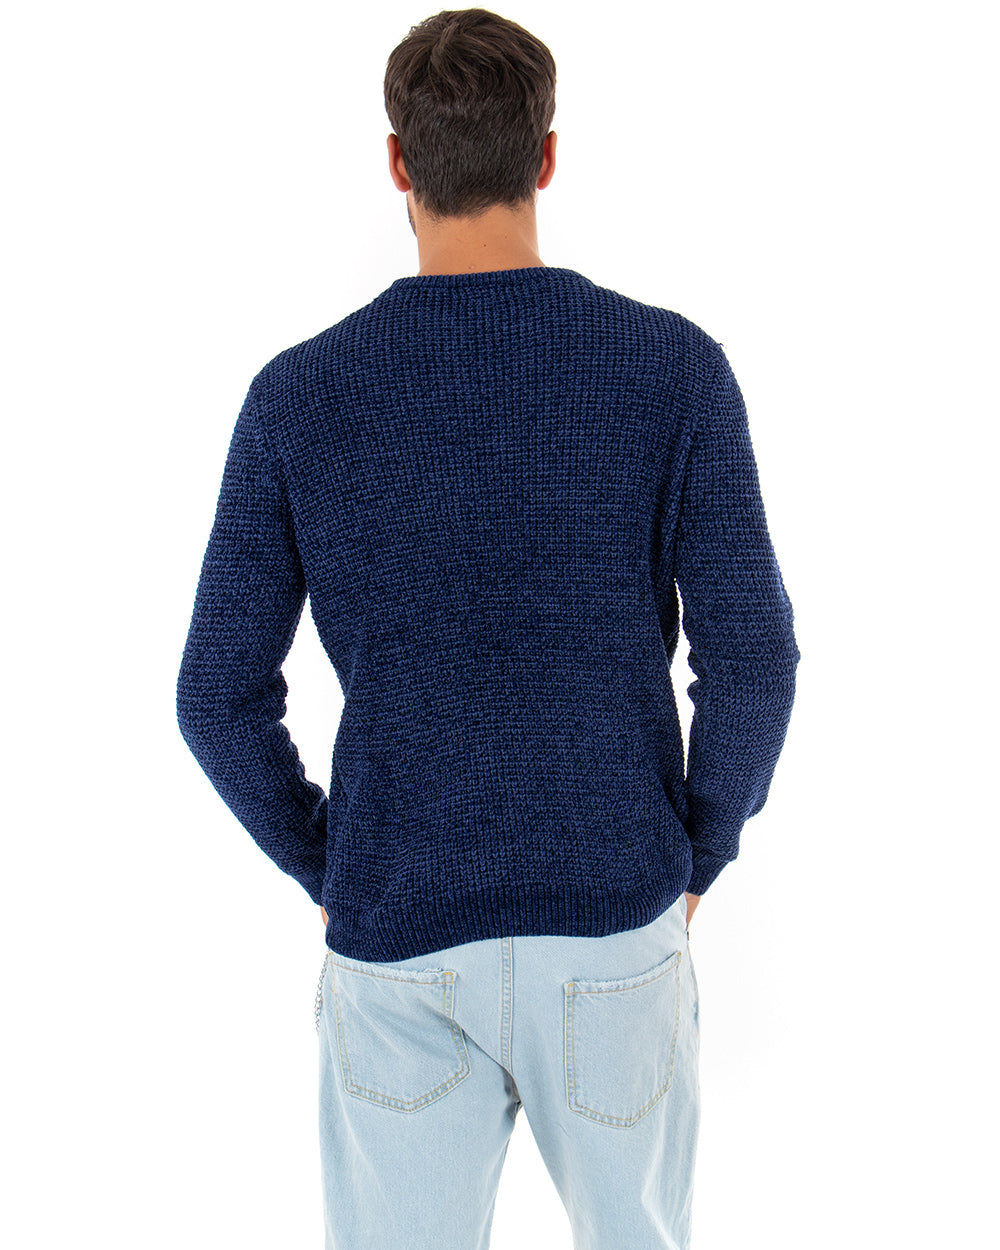 Men's Sweater Long Sleeves Chenille Solid Color Blue Crew Neck GIOSAL